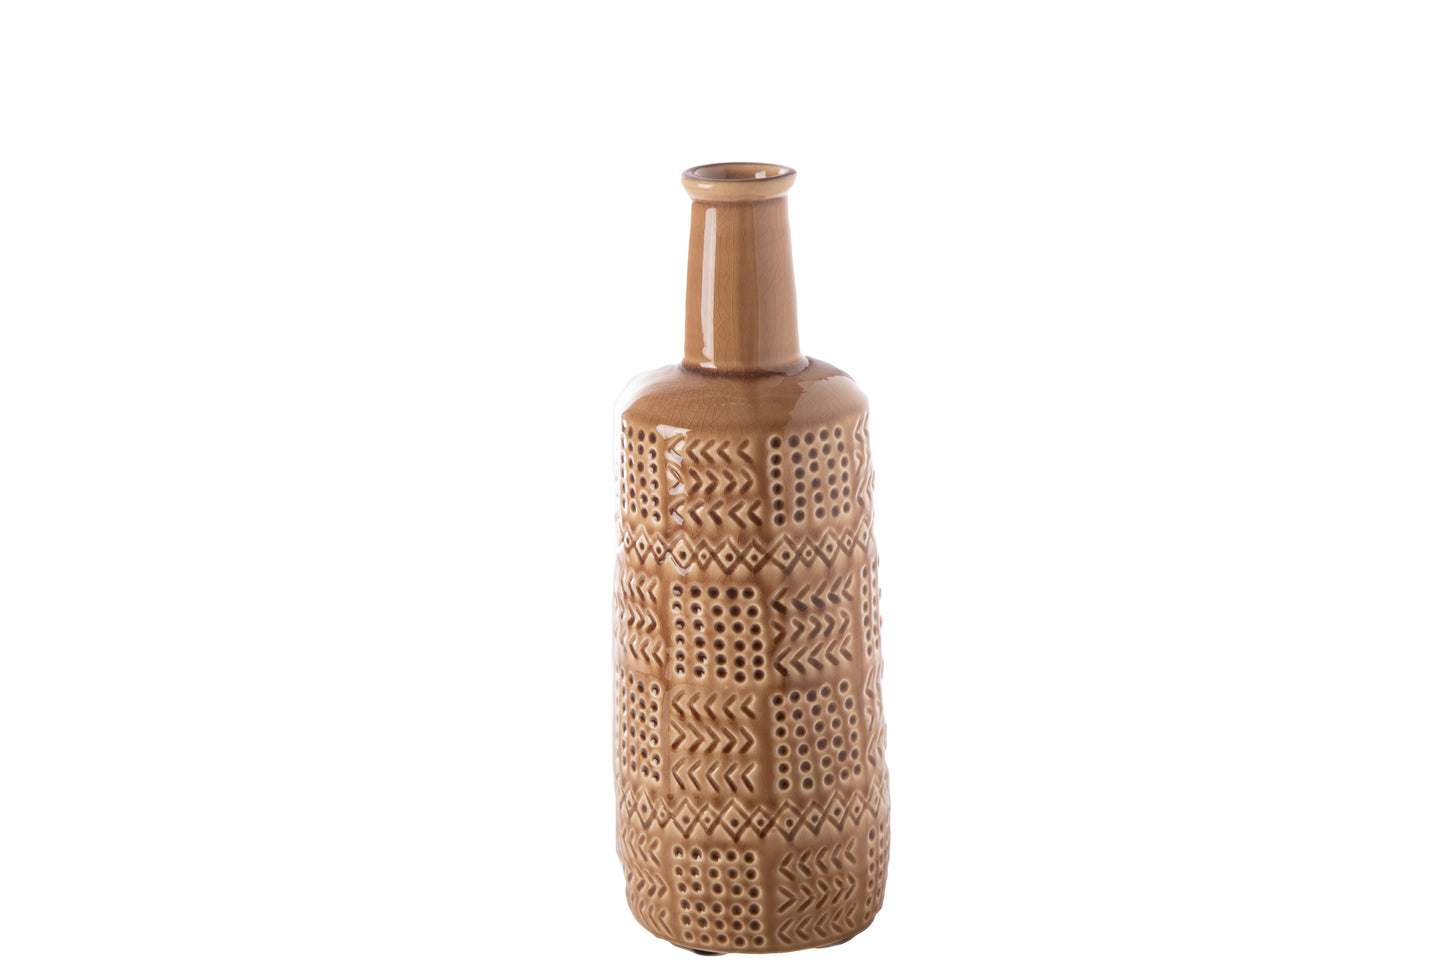 Ceramic Round Bottle Vase with Long Neck and Layered Tribal Pattern Design